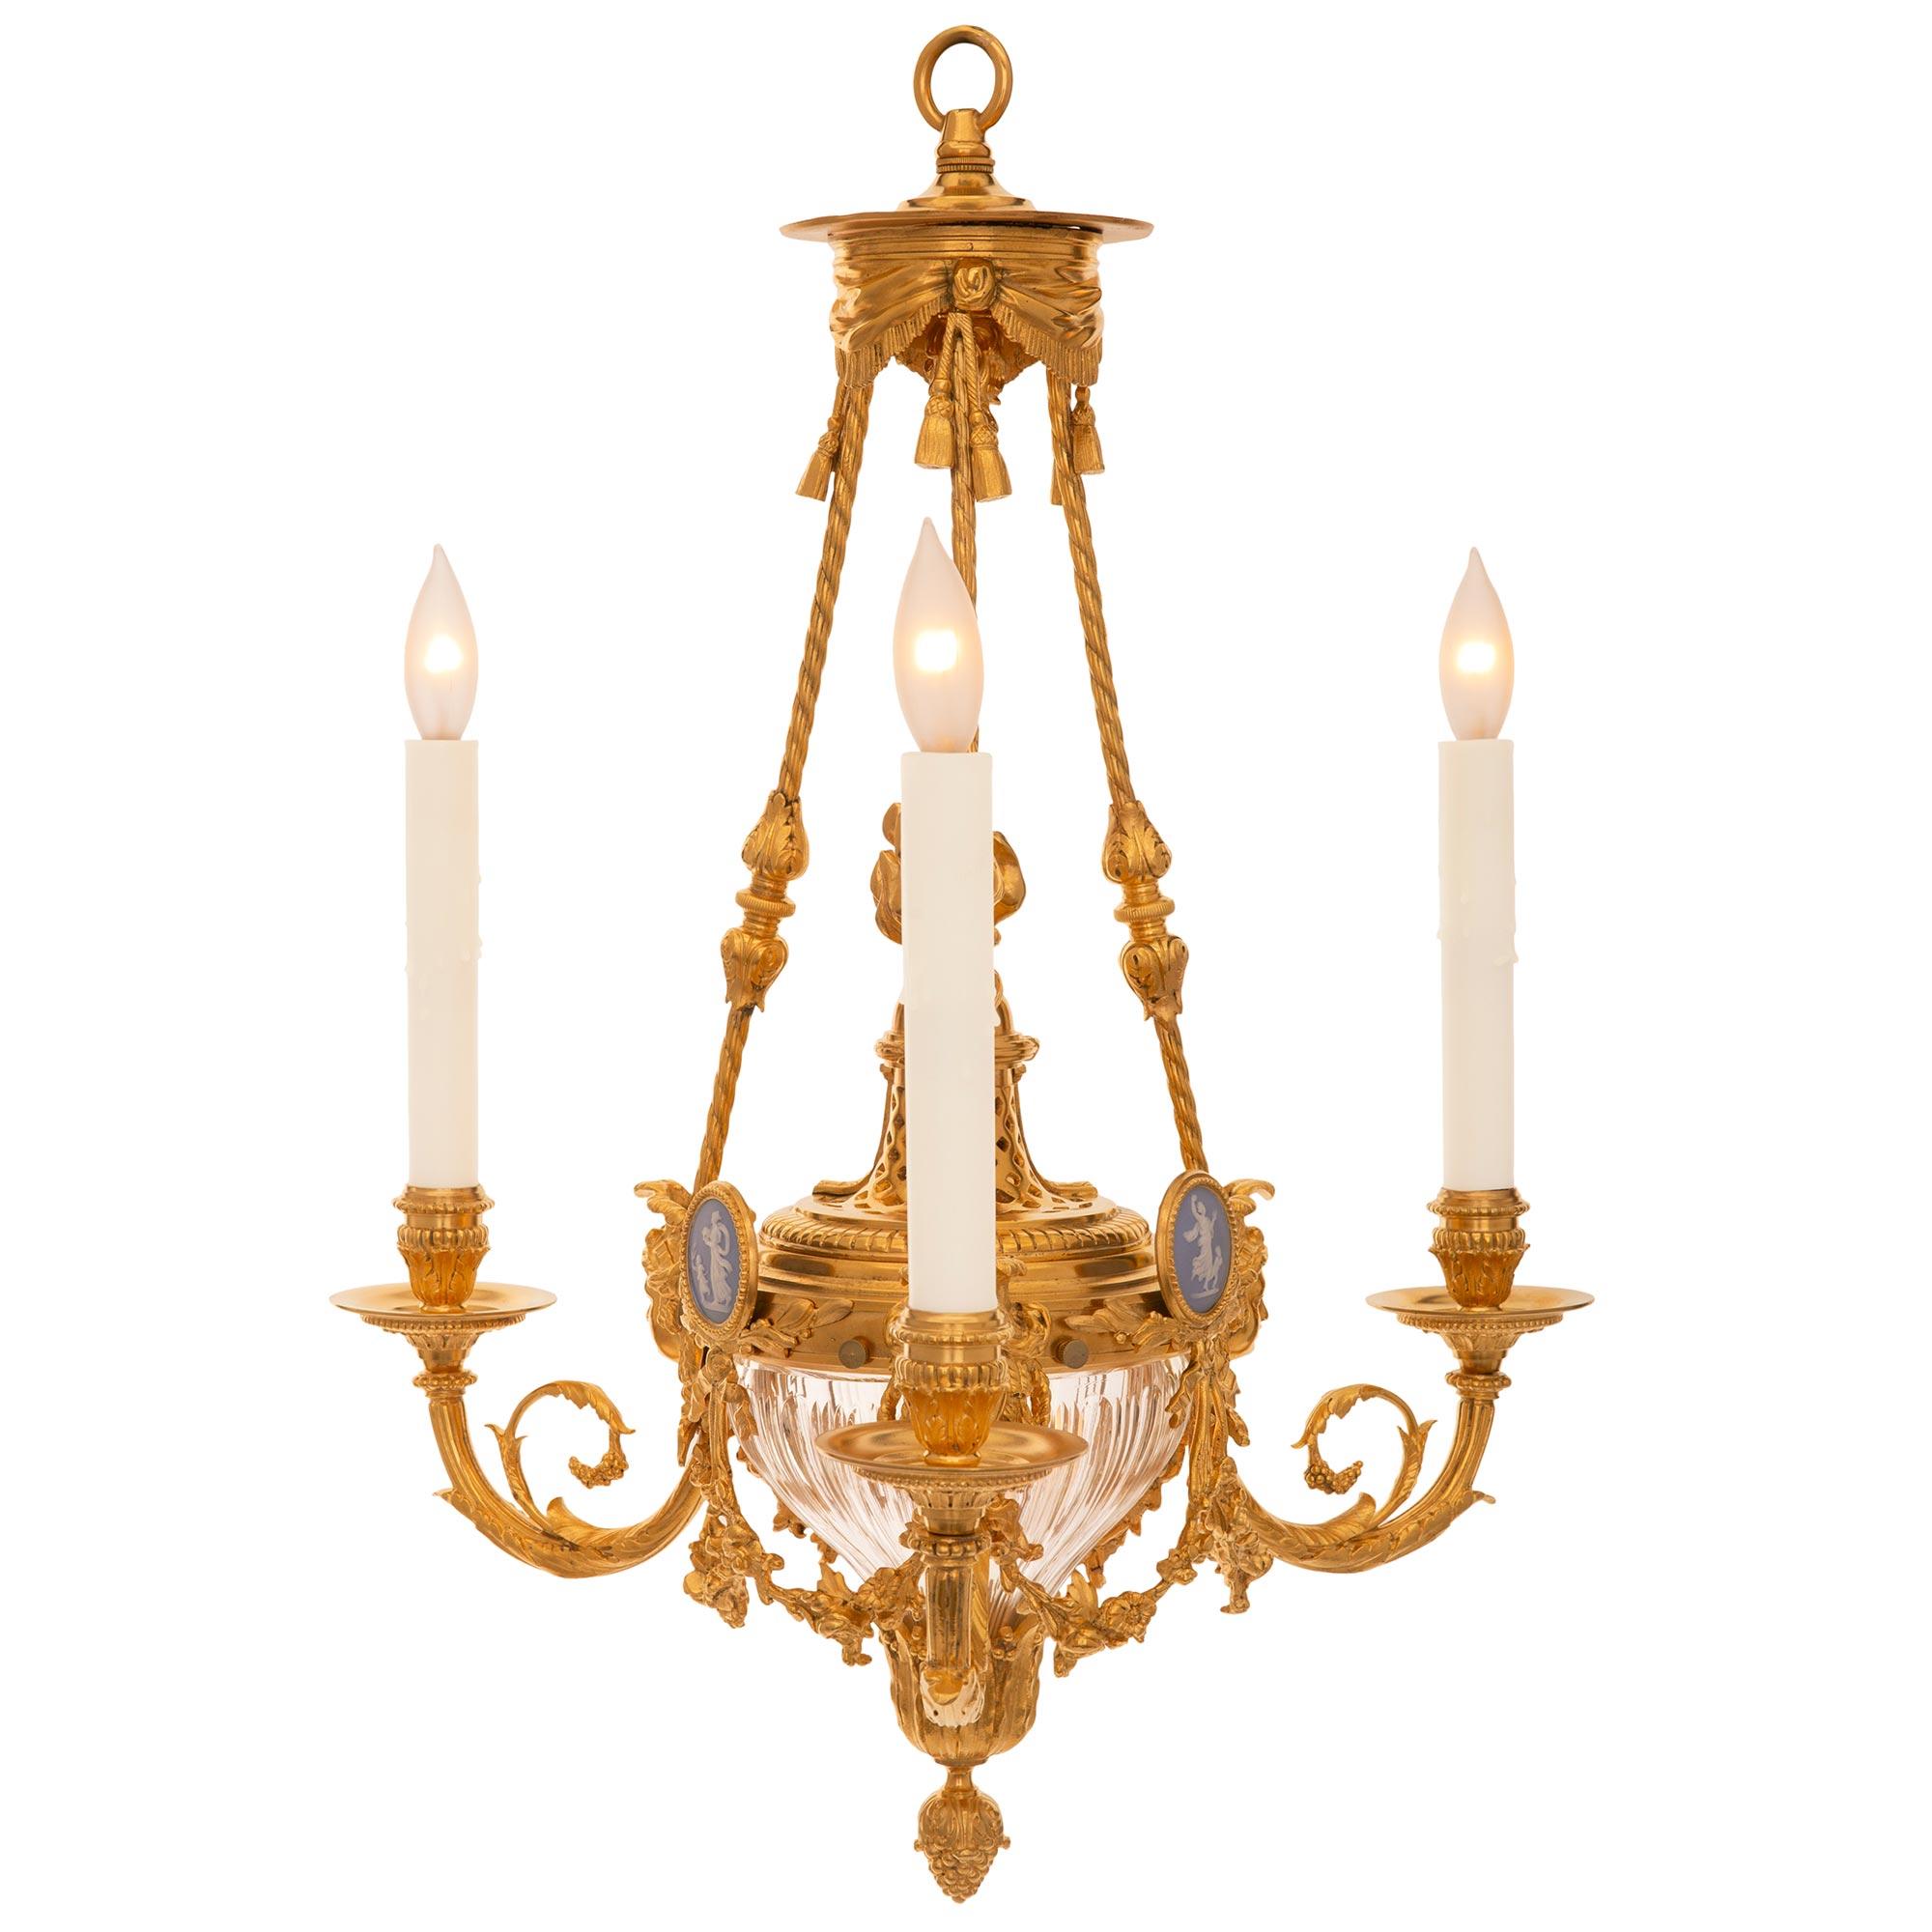 French 19th Century Louis XVI St. Ormolu, Wedgwood & Baccarat Crystal Chandelier In Good Condition For Sale In West Palm Beach, FL